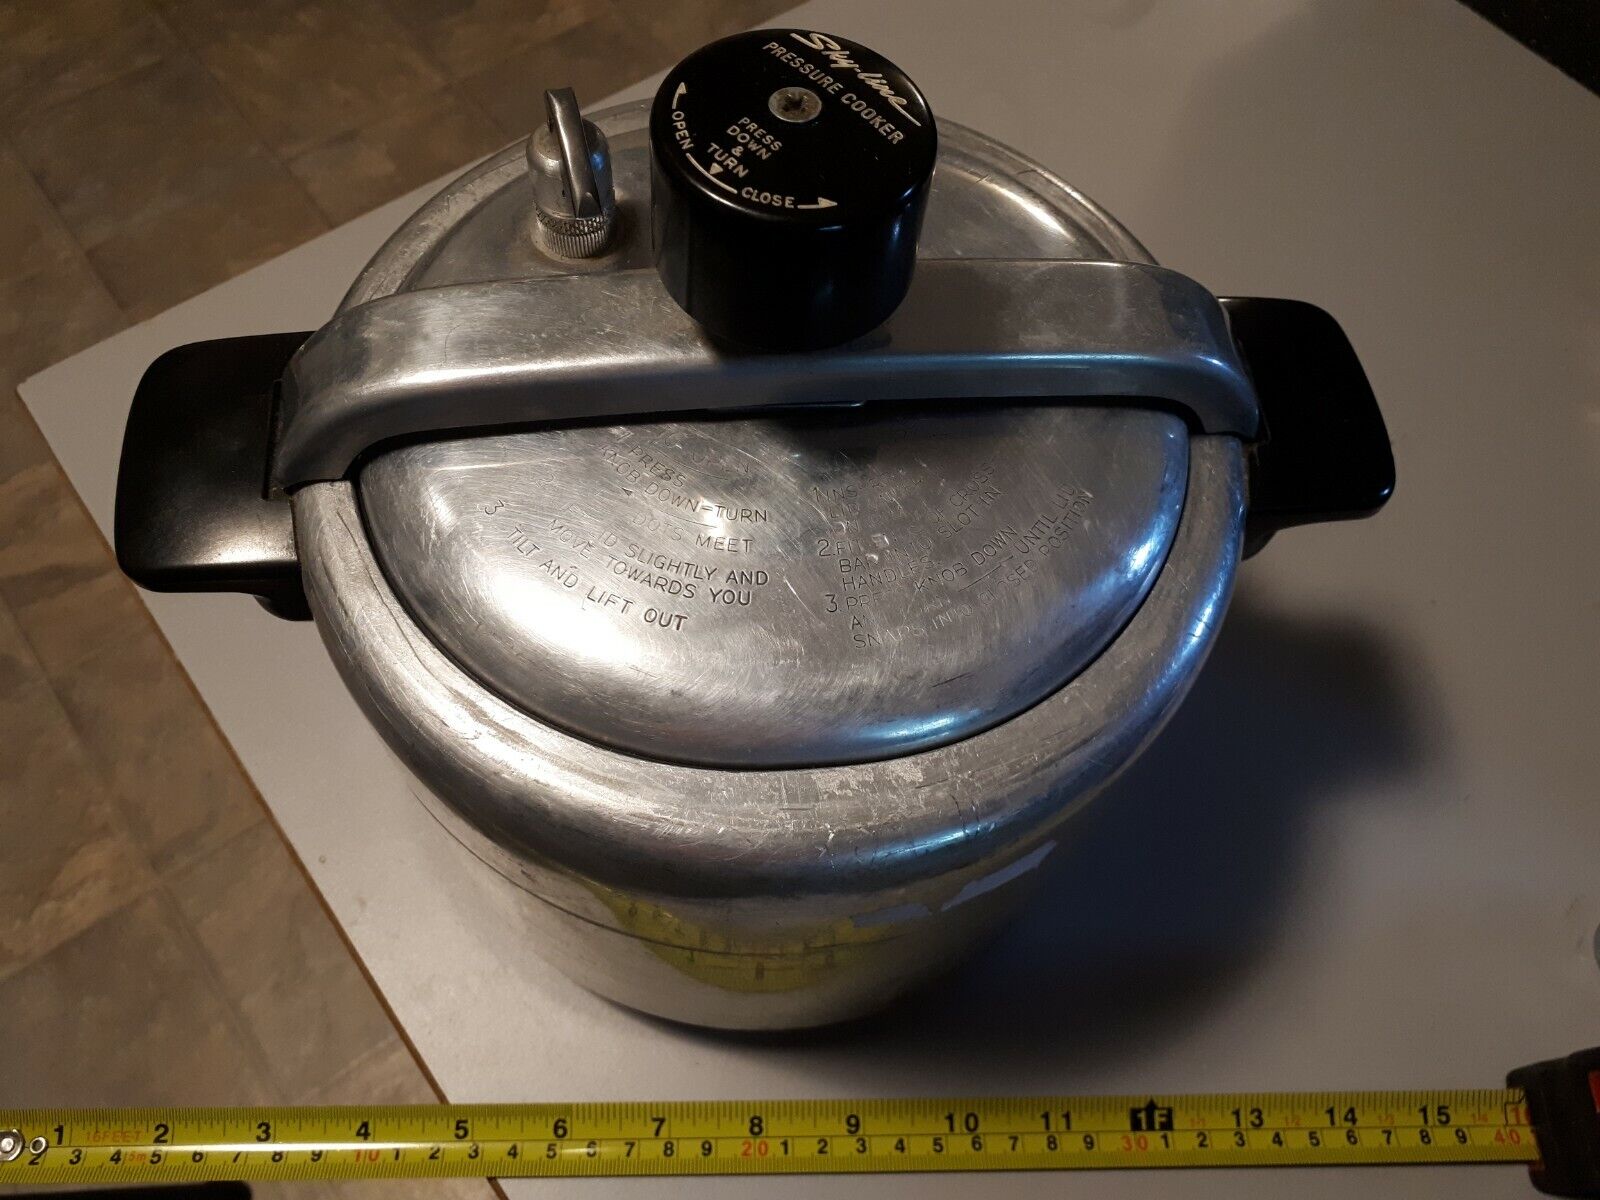 Vintage Sky-line 6004 Pressure Cooker with accessories, England, Not tested